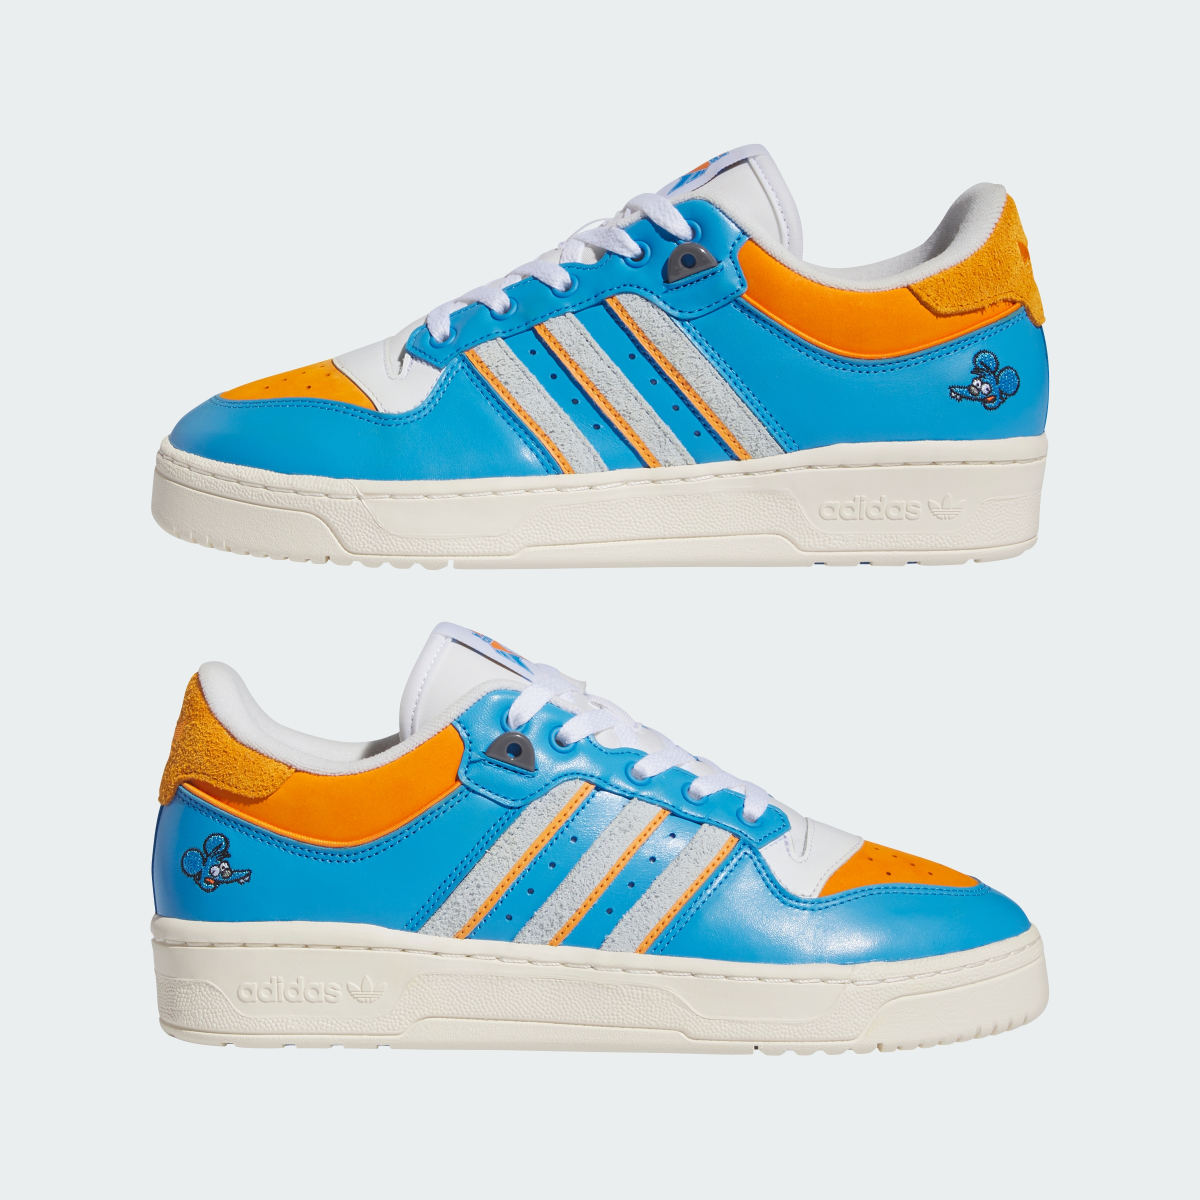 Adidas Sapatilhas adidas Rivalry Low Itchy. 10